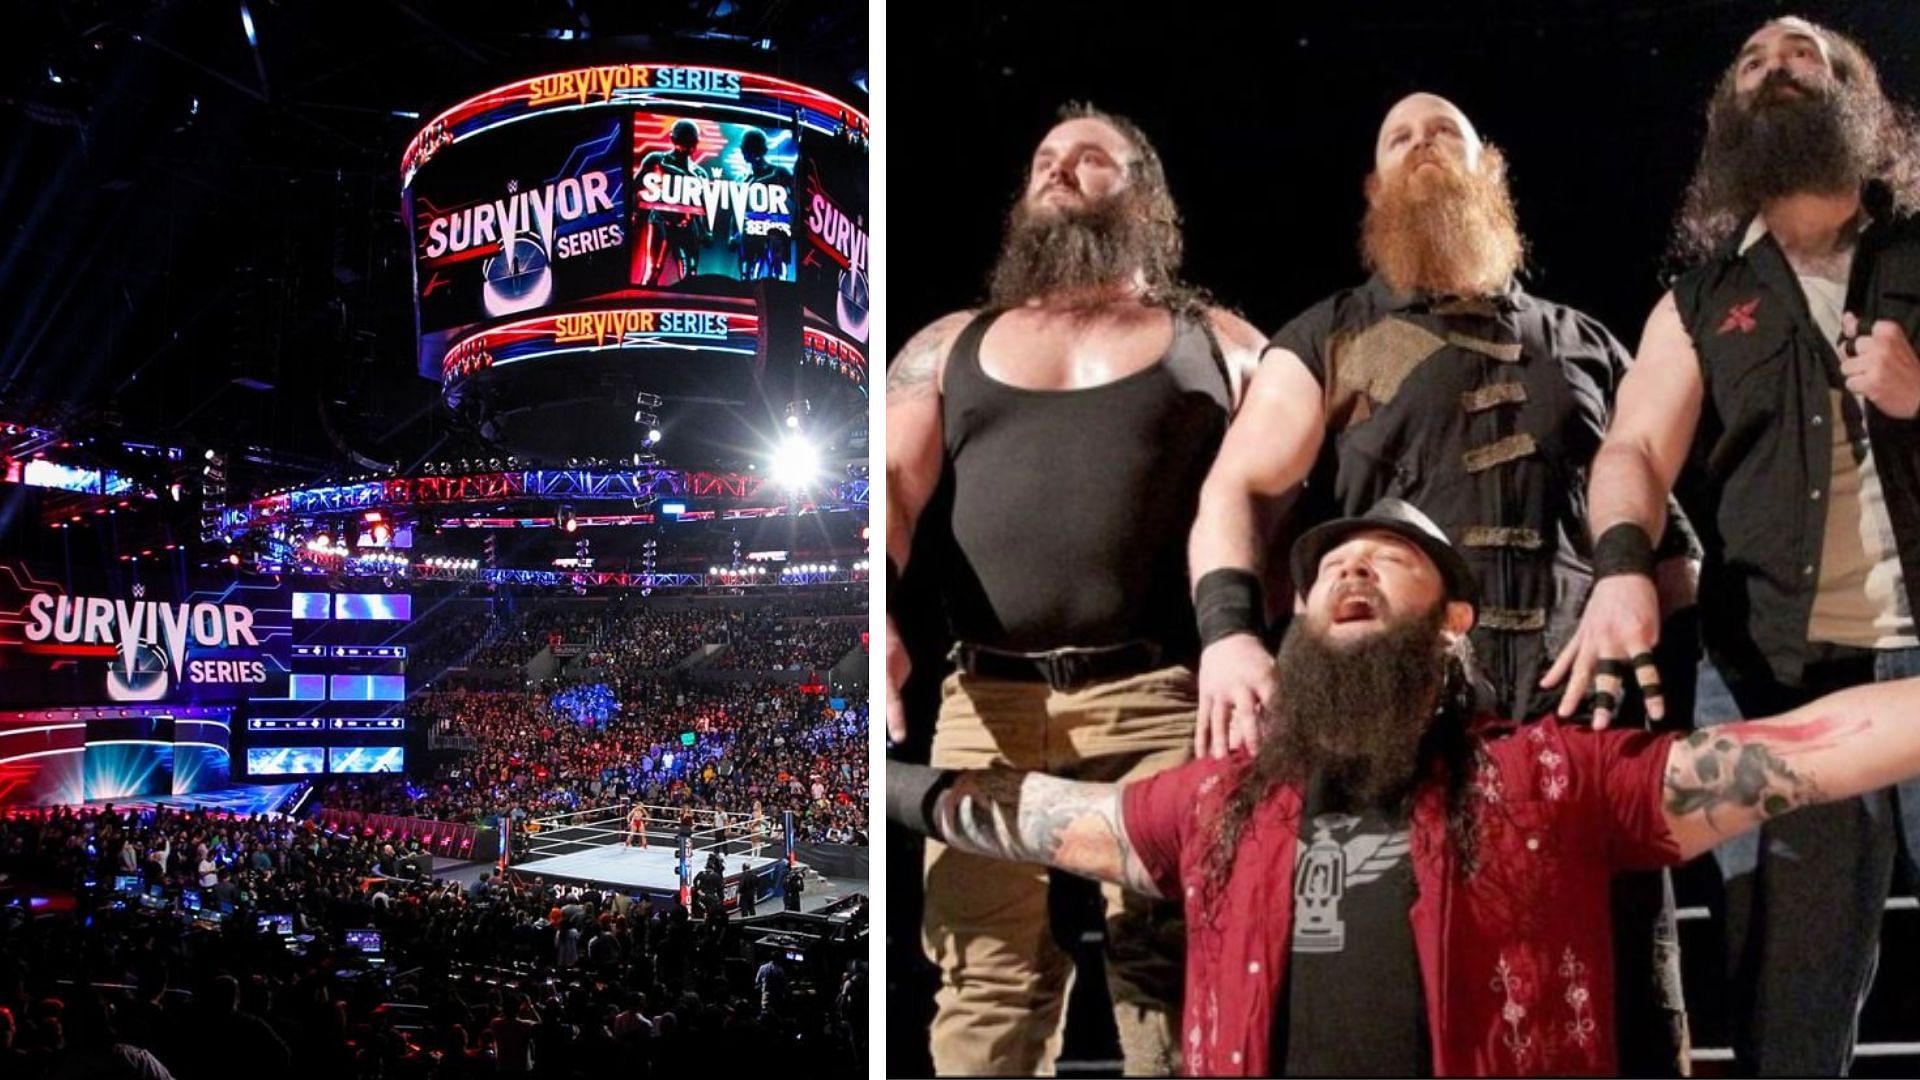 The Wyatt Family was a stable in WWE